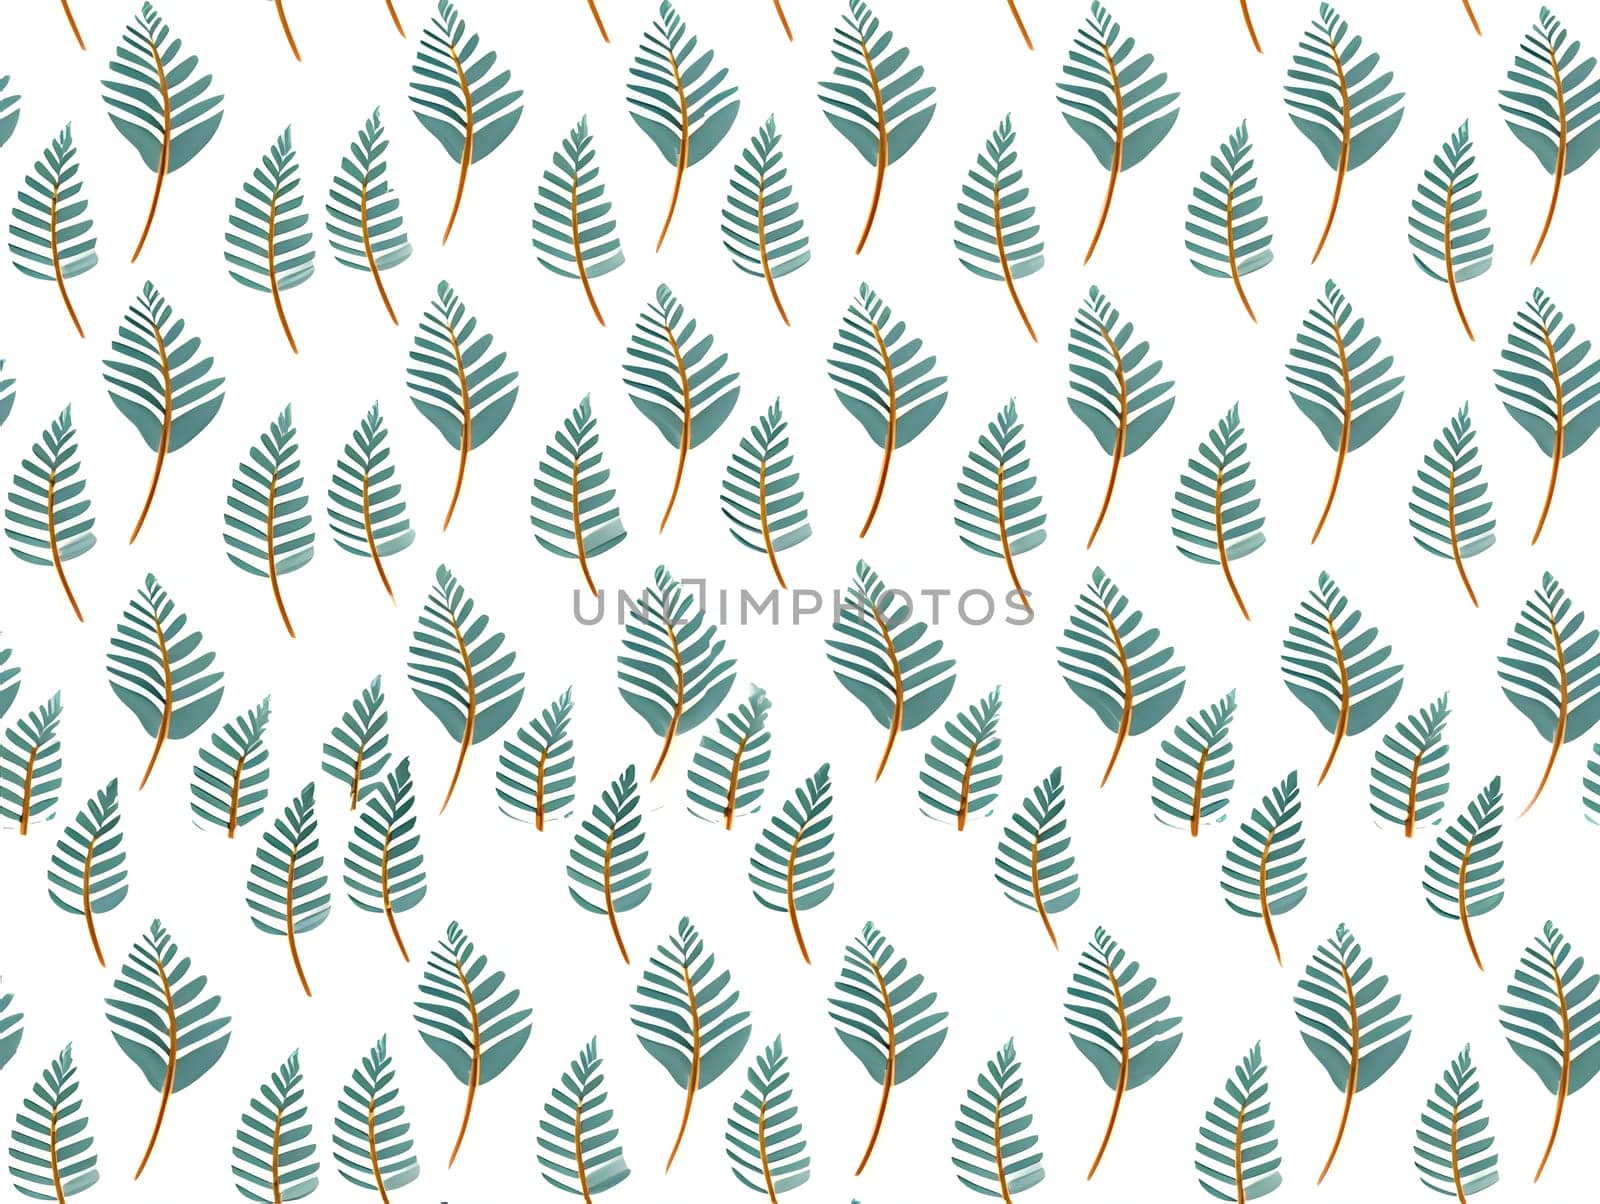 Patterns and banners backgrounds: leafs plant pattern background vector illustration designiconicon graphic vector illustration design